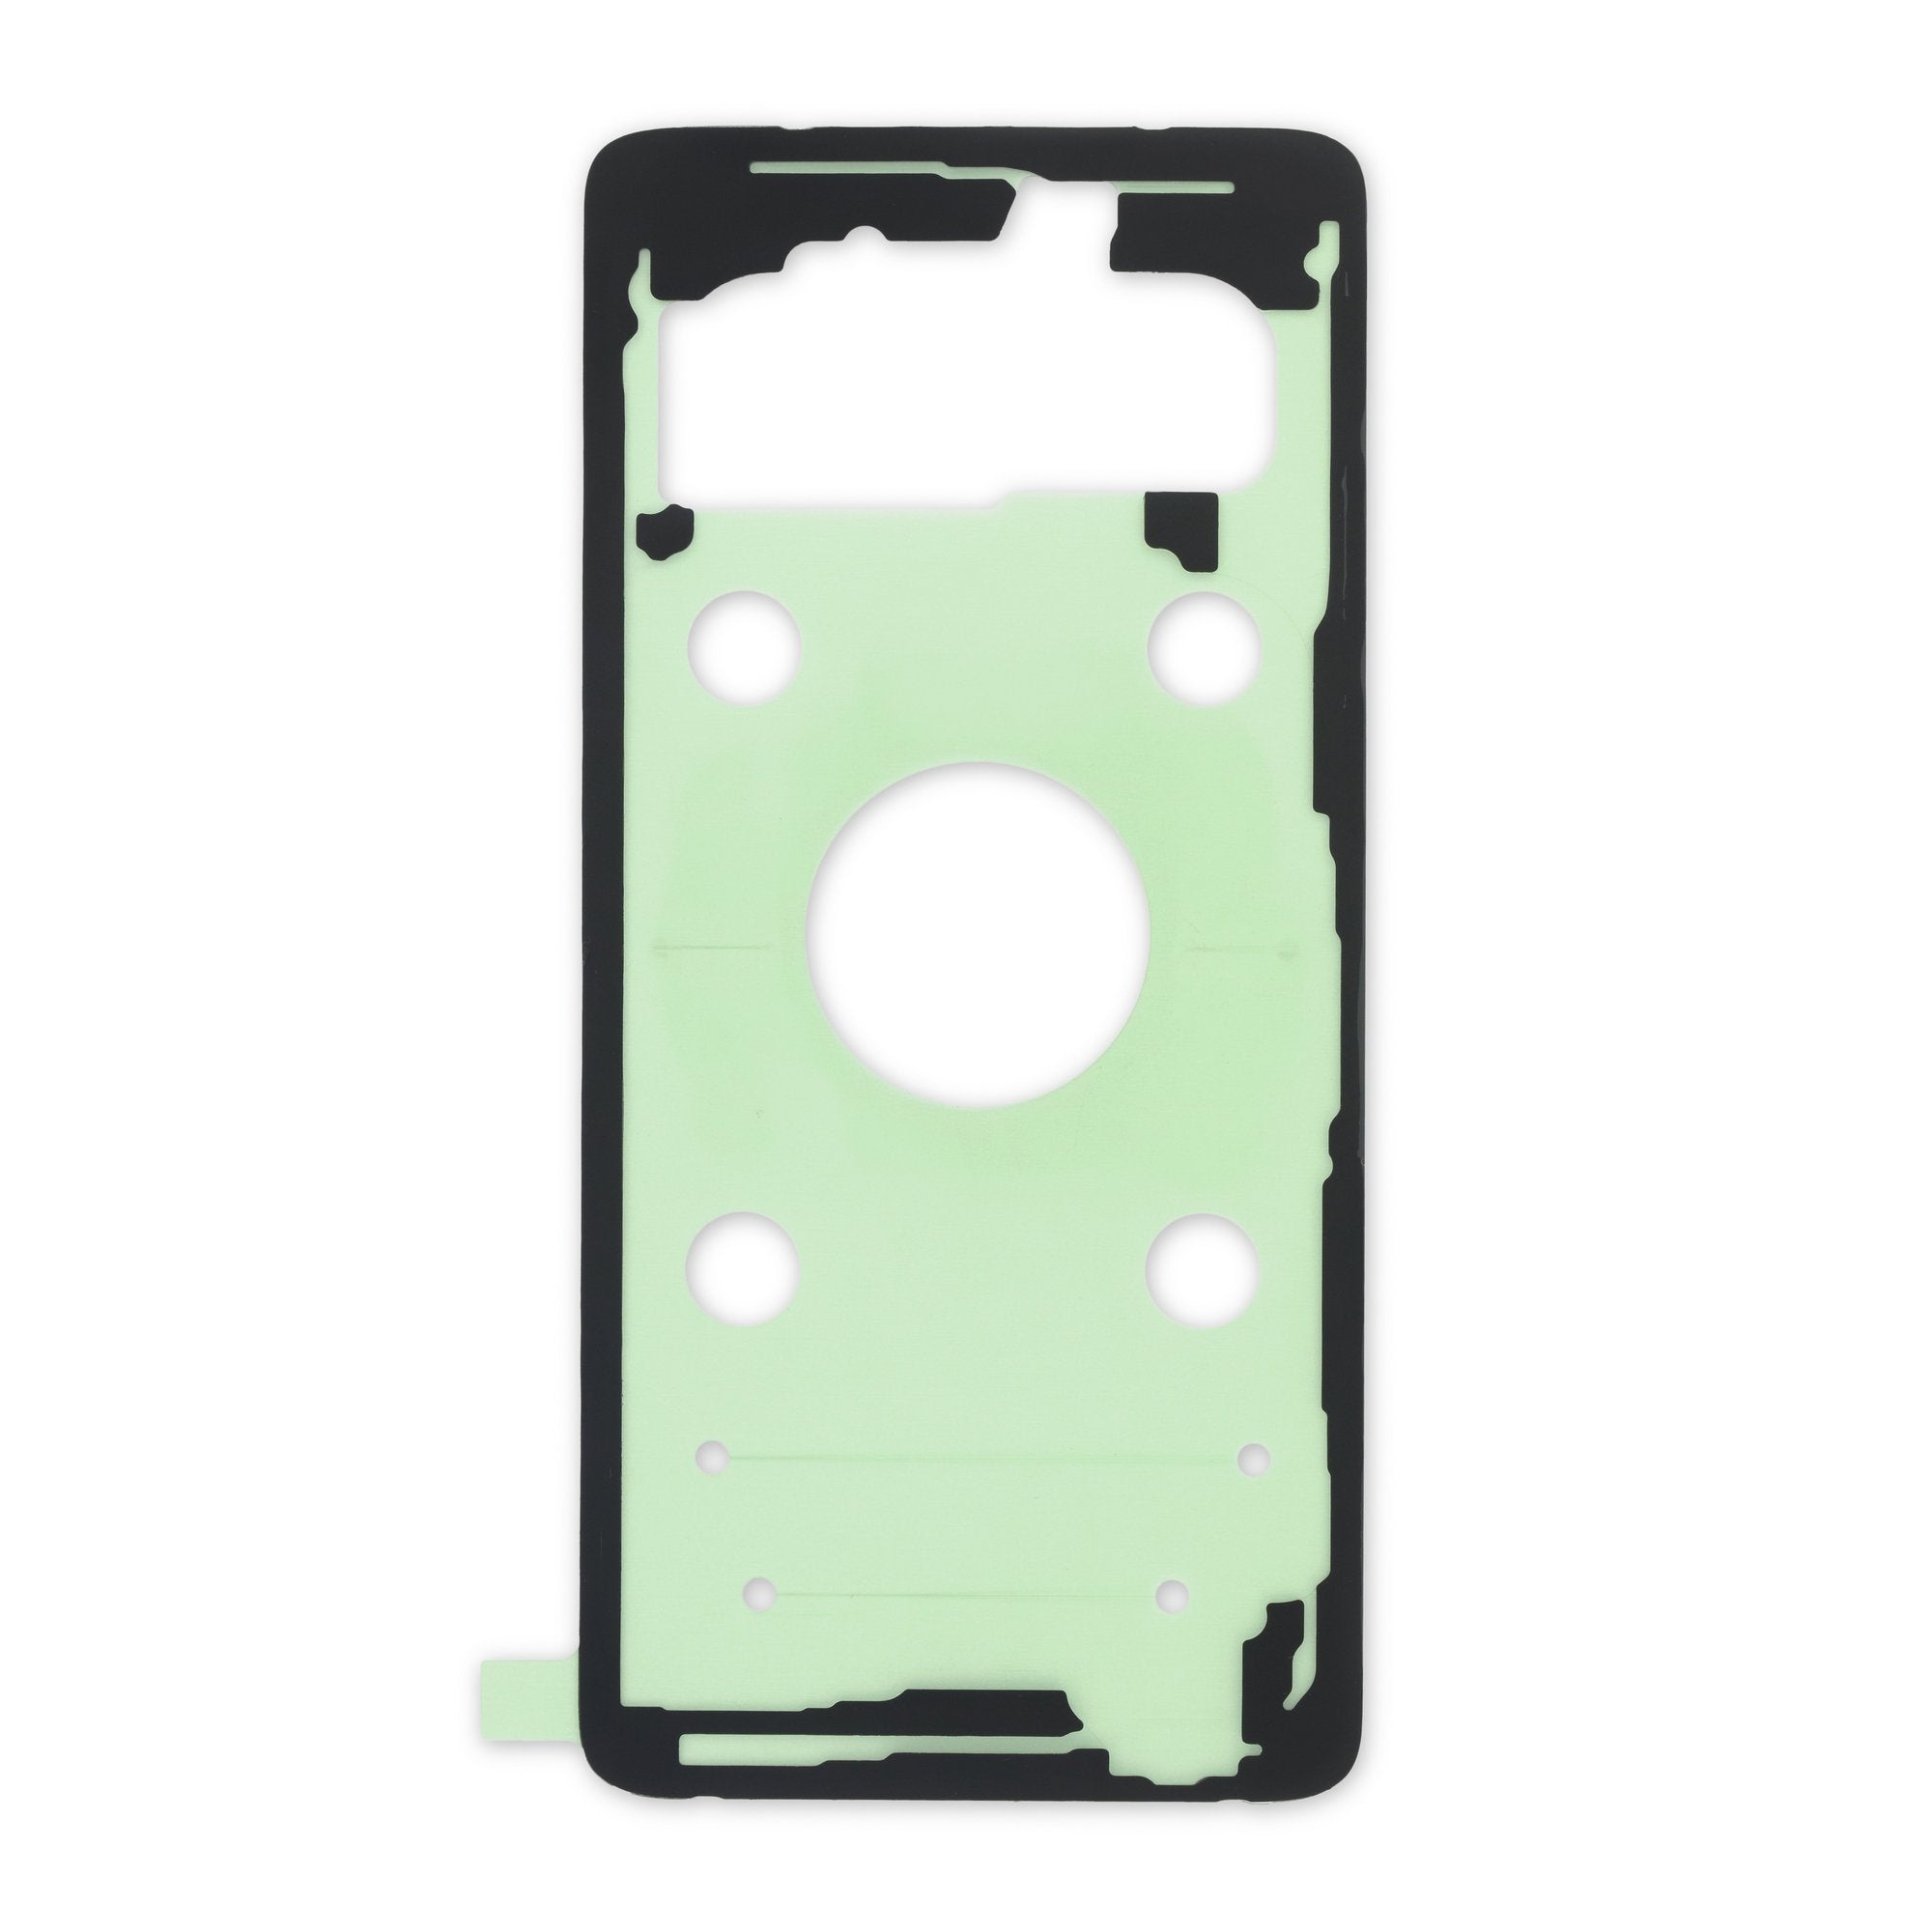 Galaxy S10 Rear Cover Adhesive New